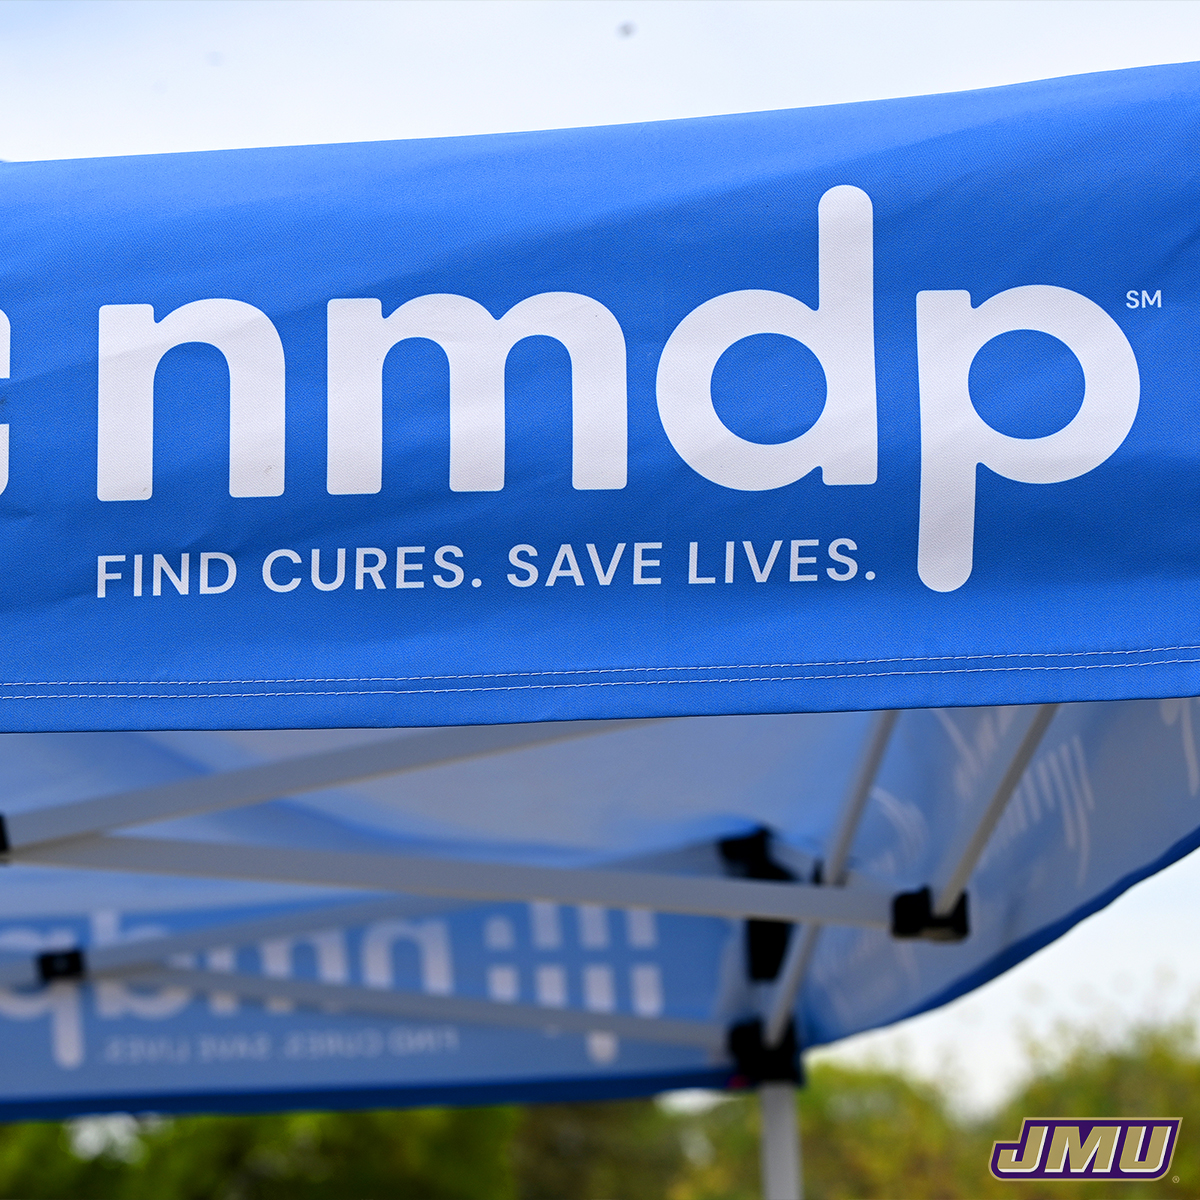 This week, we teamed up with @nmdp_org to help save lives, as members of the JMU community signed up for the bone marrow registry. Find cures. Save lives. #GoDukes